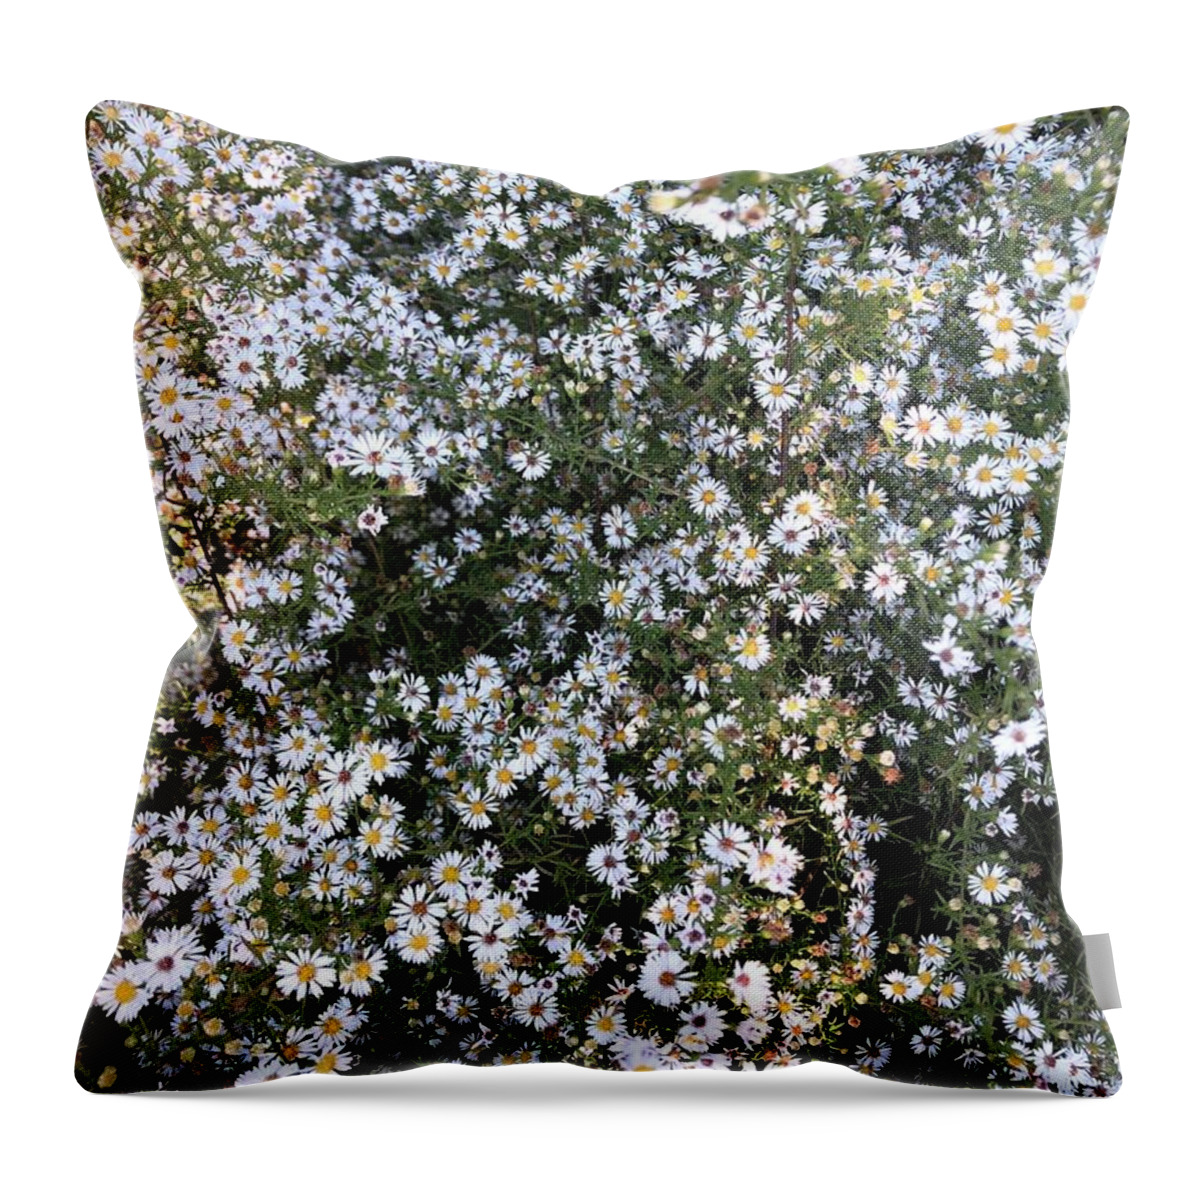 Asters Throw Pillow featuring the photograph Asters Wildflowers by Valerie Collins